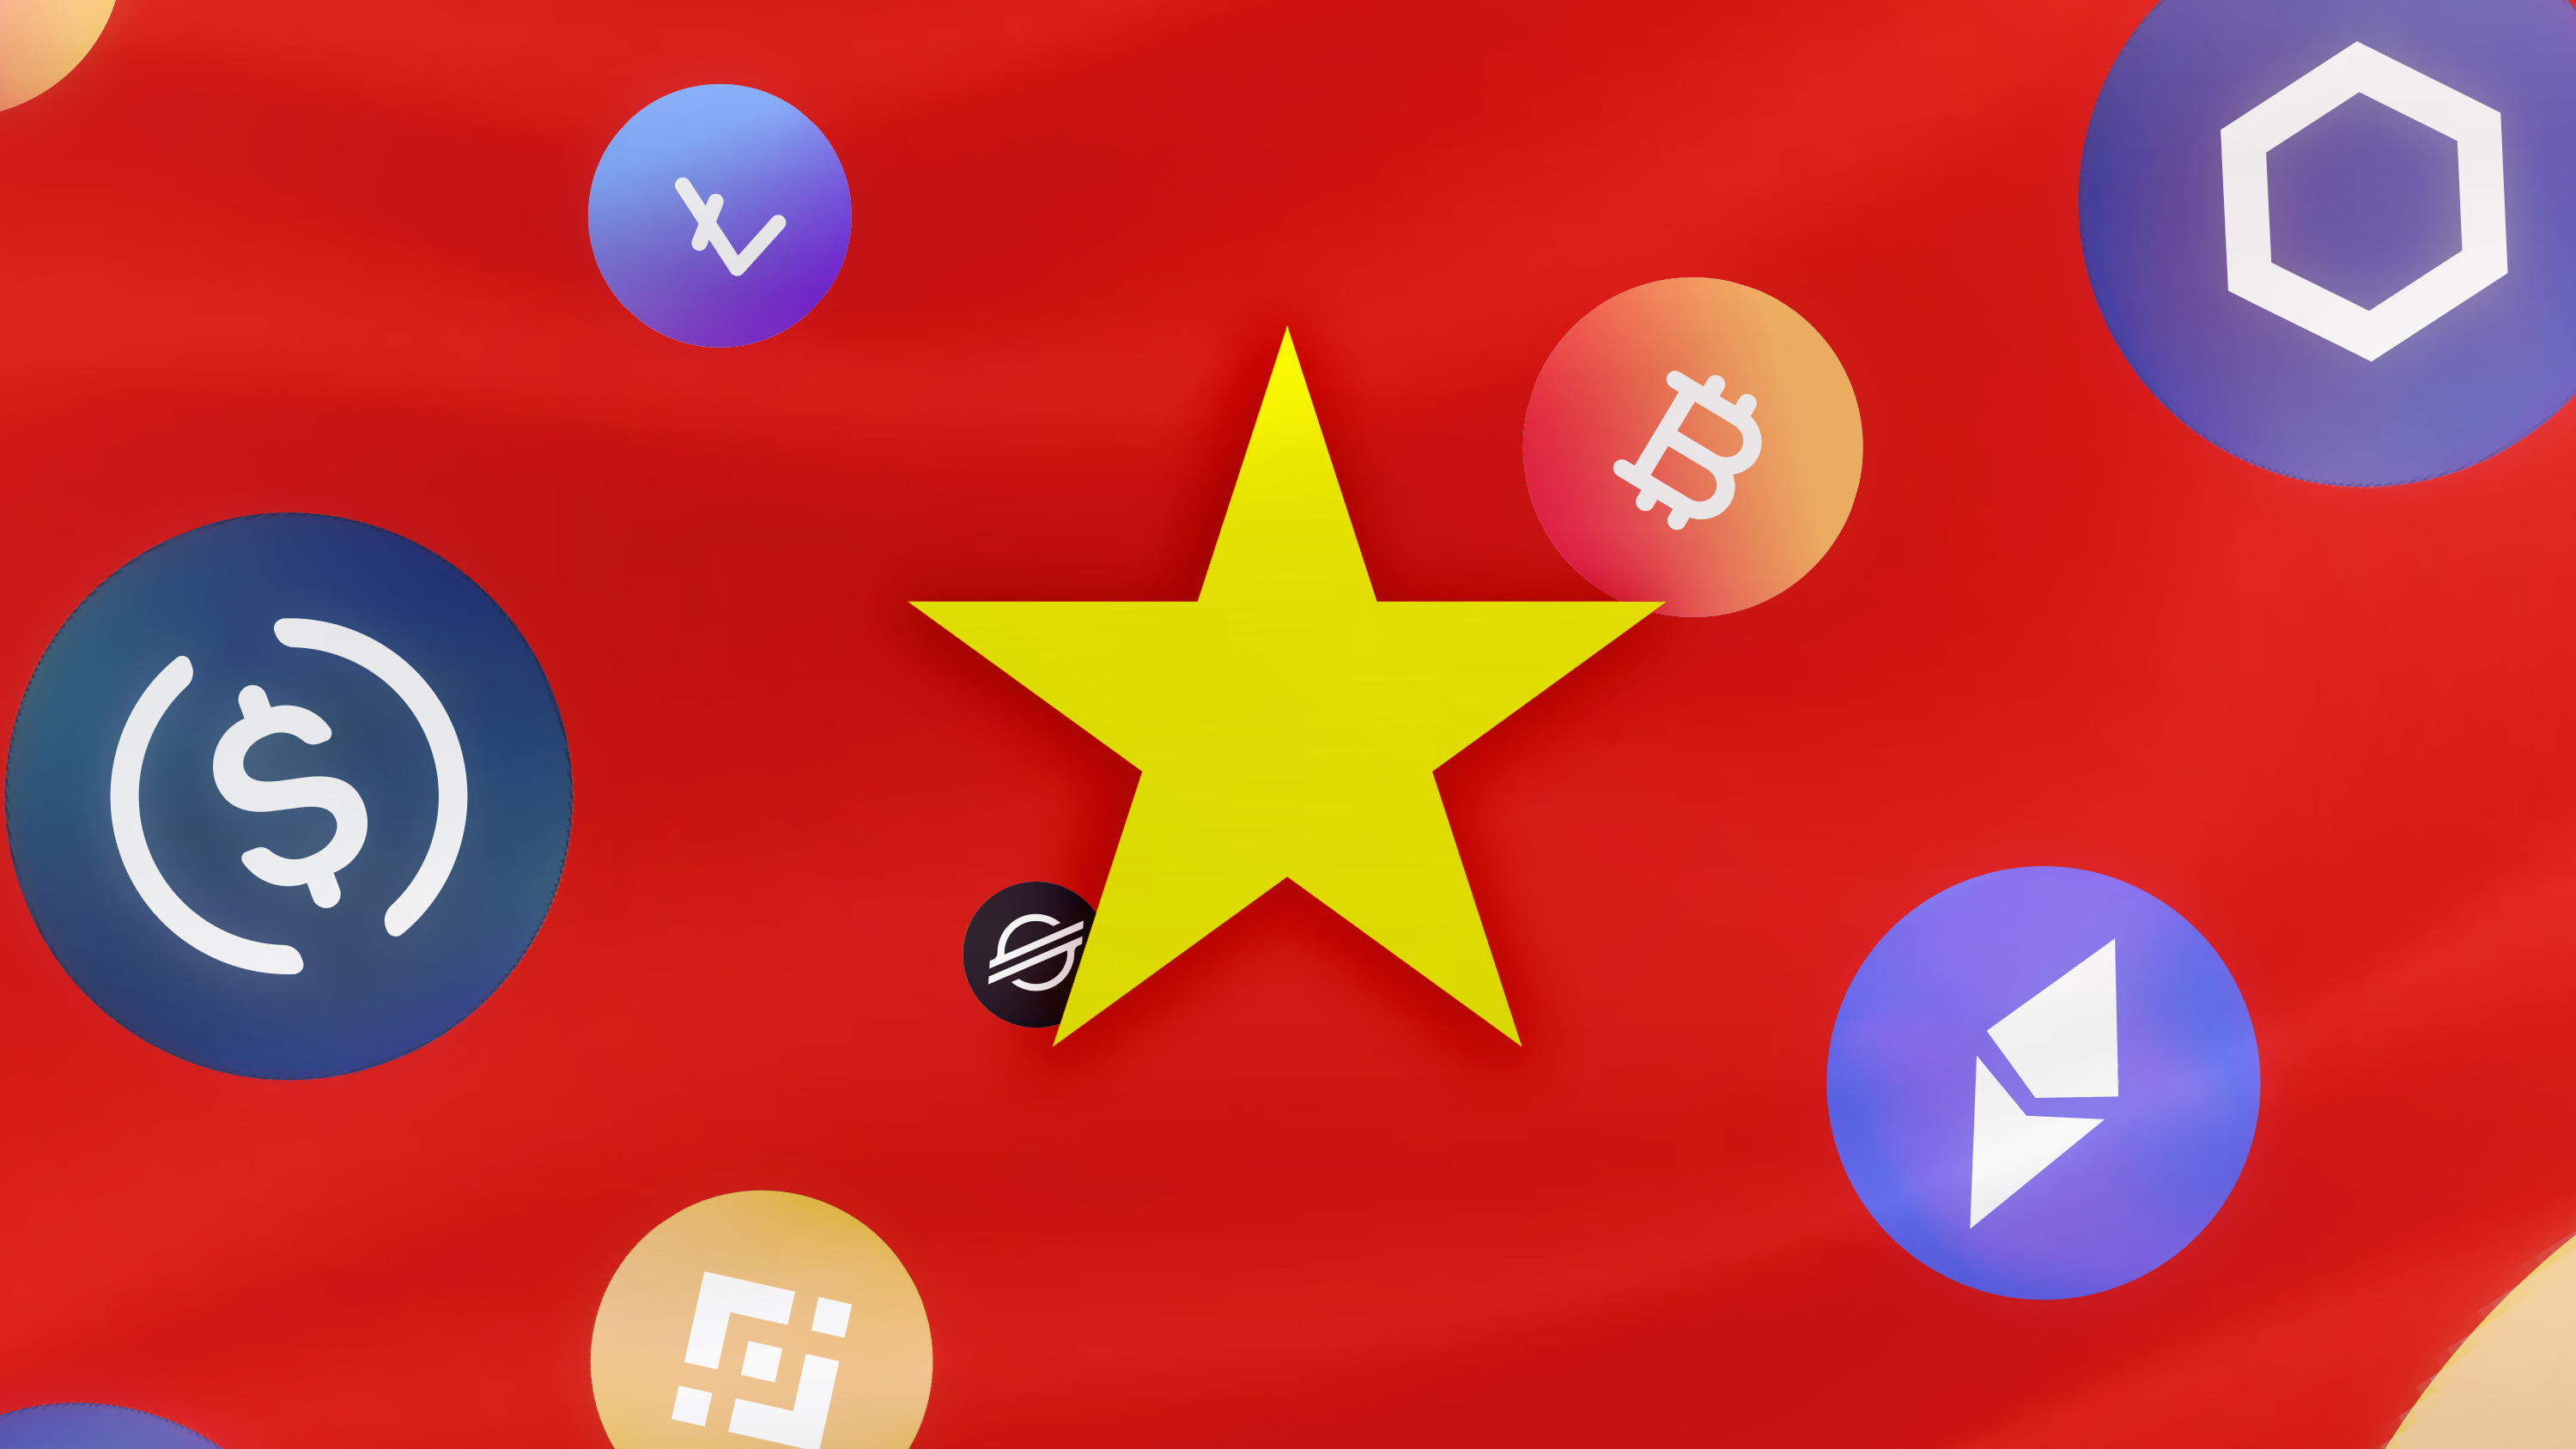 graphic inspired by national flag of vietnam with crypto icons superimposed against red background